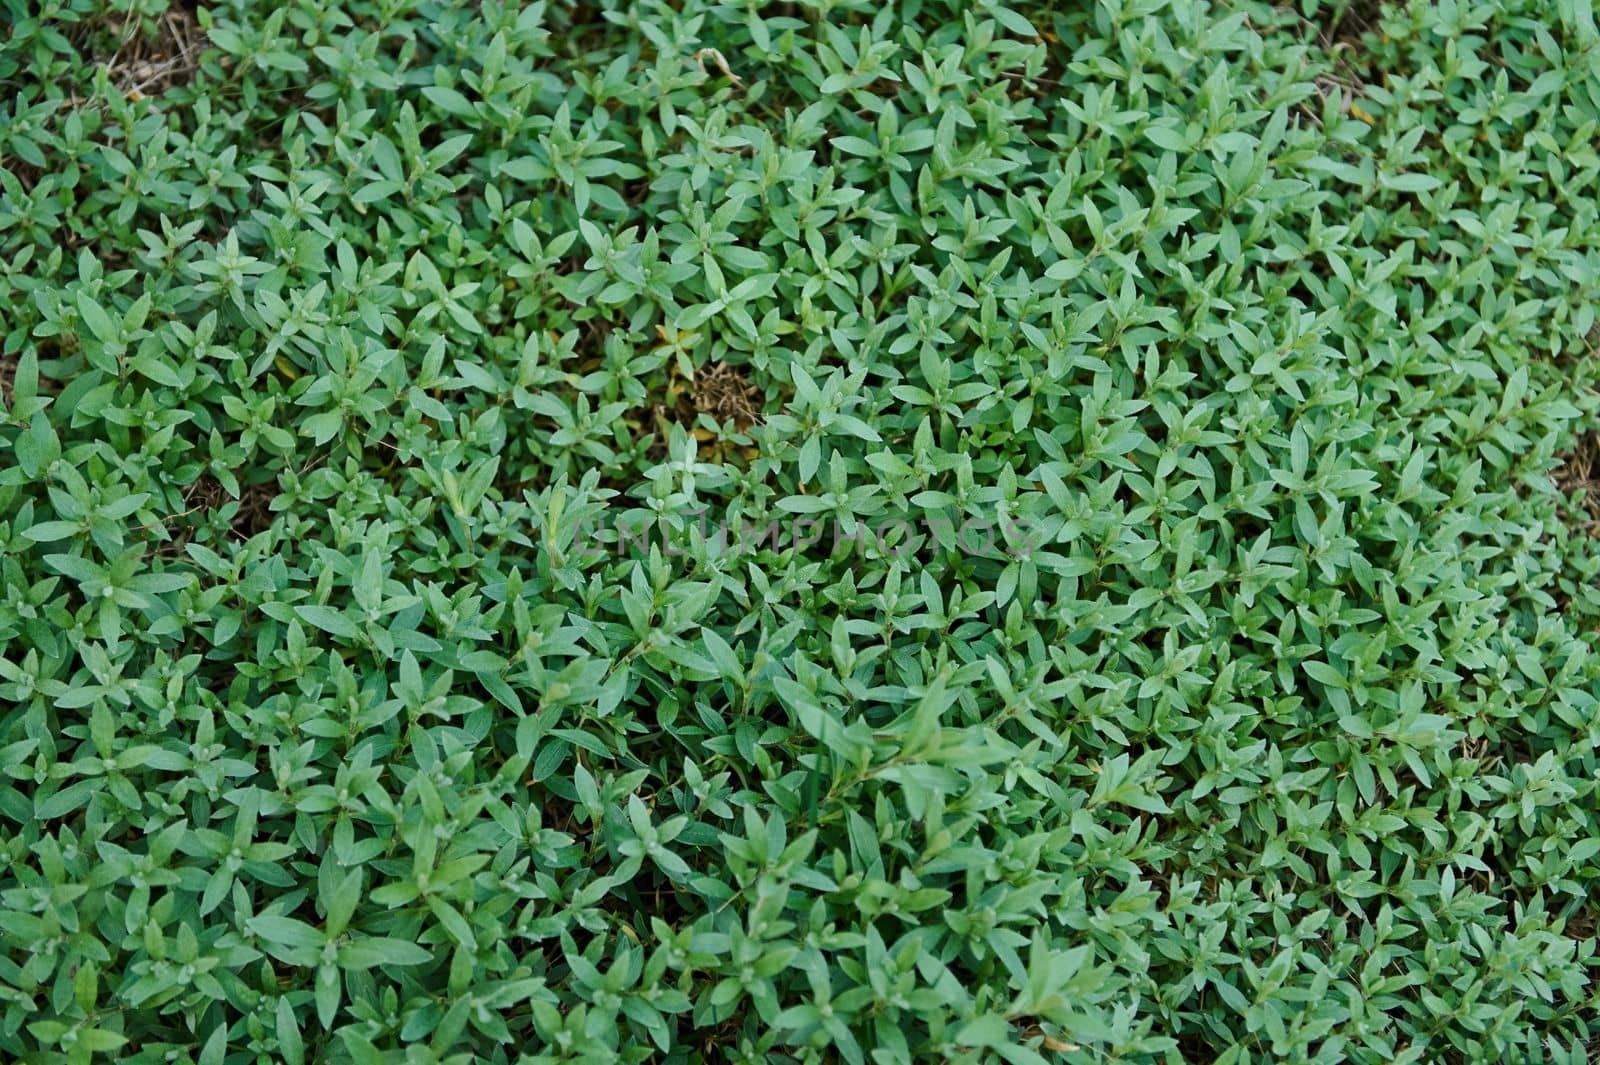 Top view. Shot of green grass or lawn texture. Idea concept used for making green background